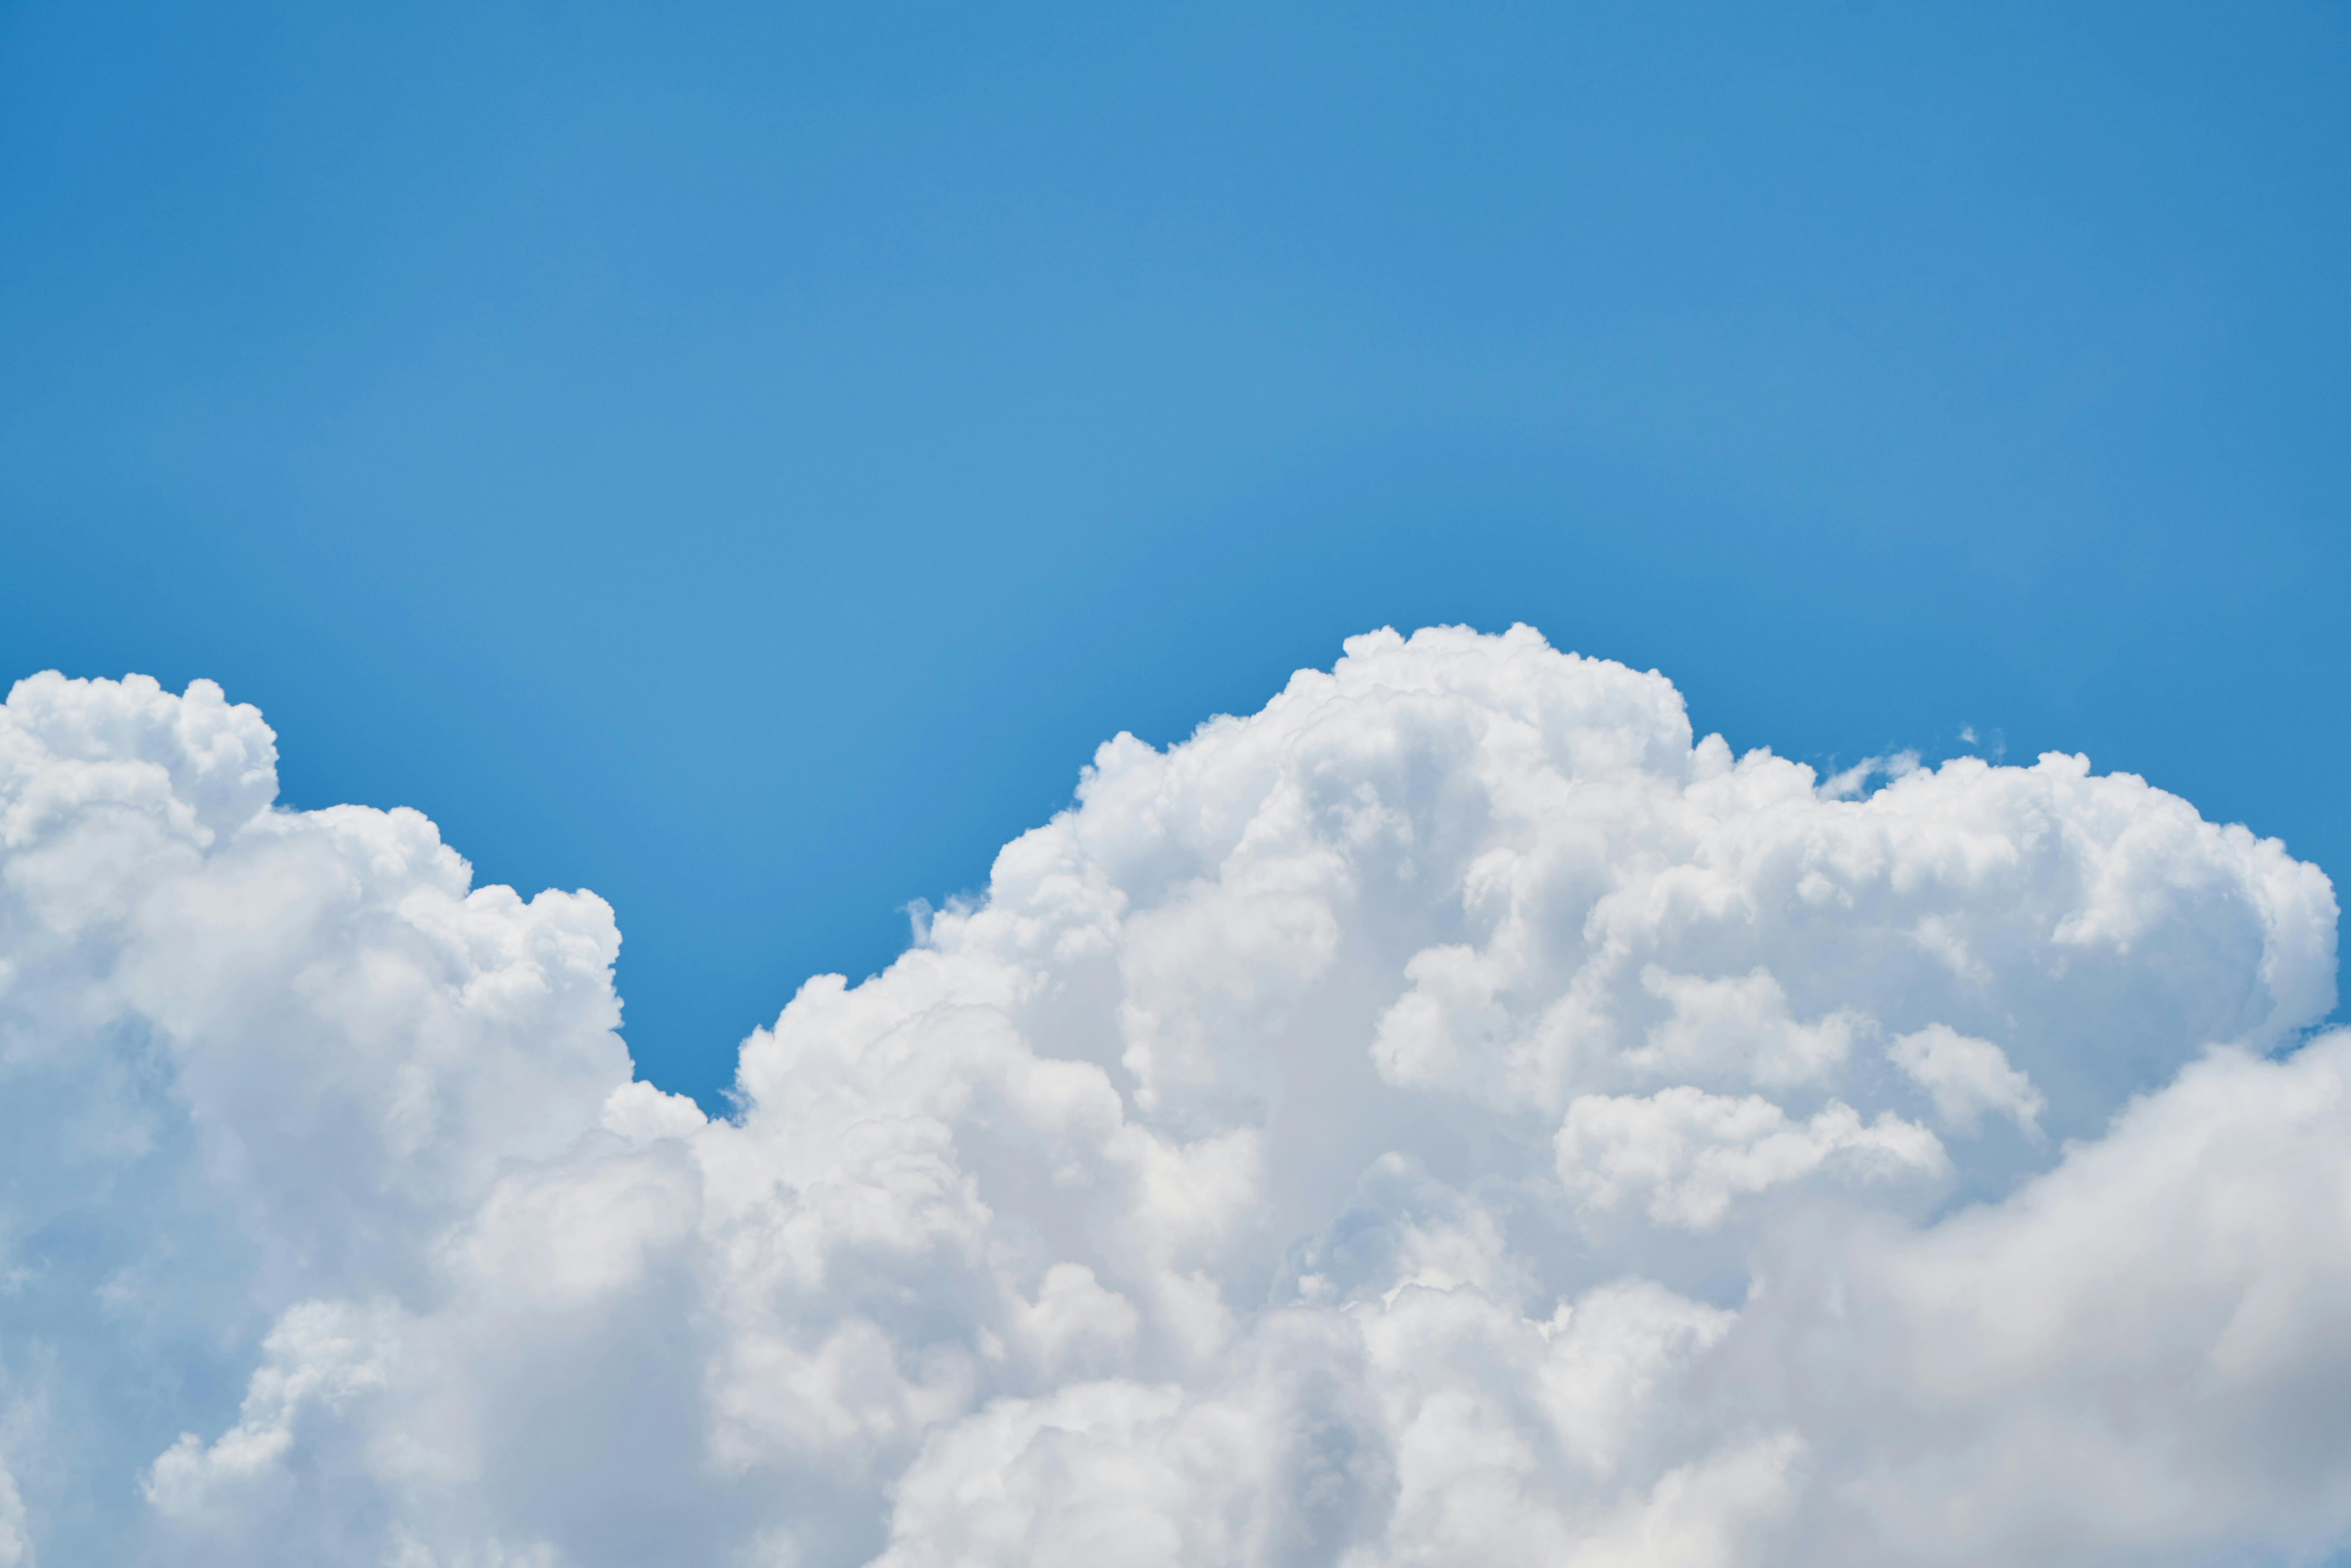 Free Stock Photo of Fluffy cloud.  Download Free Images and Free  Illustrations